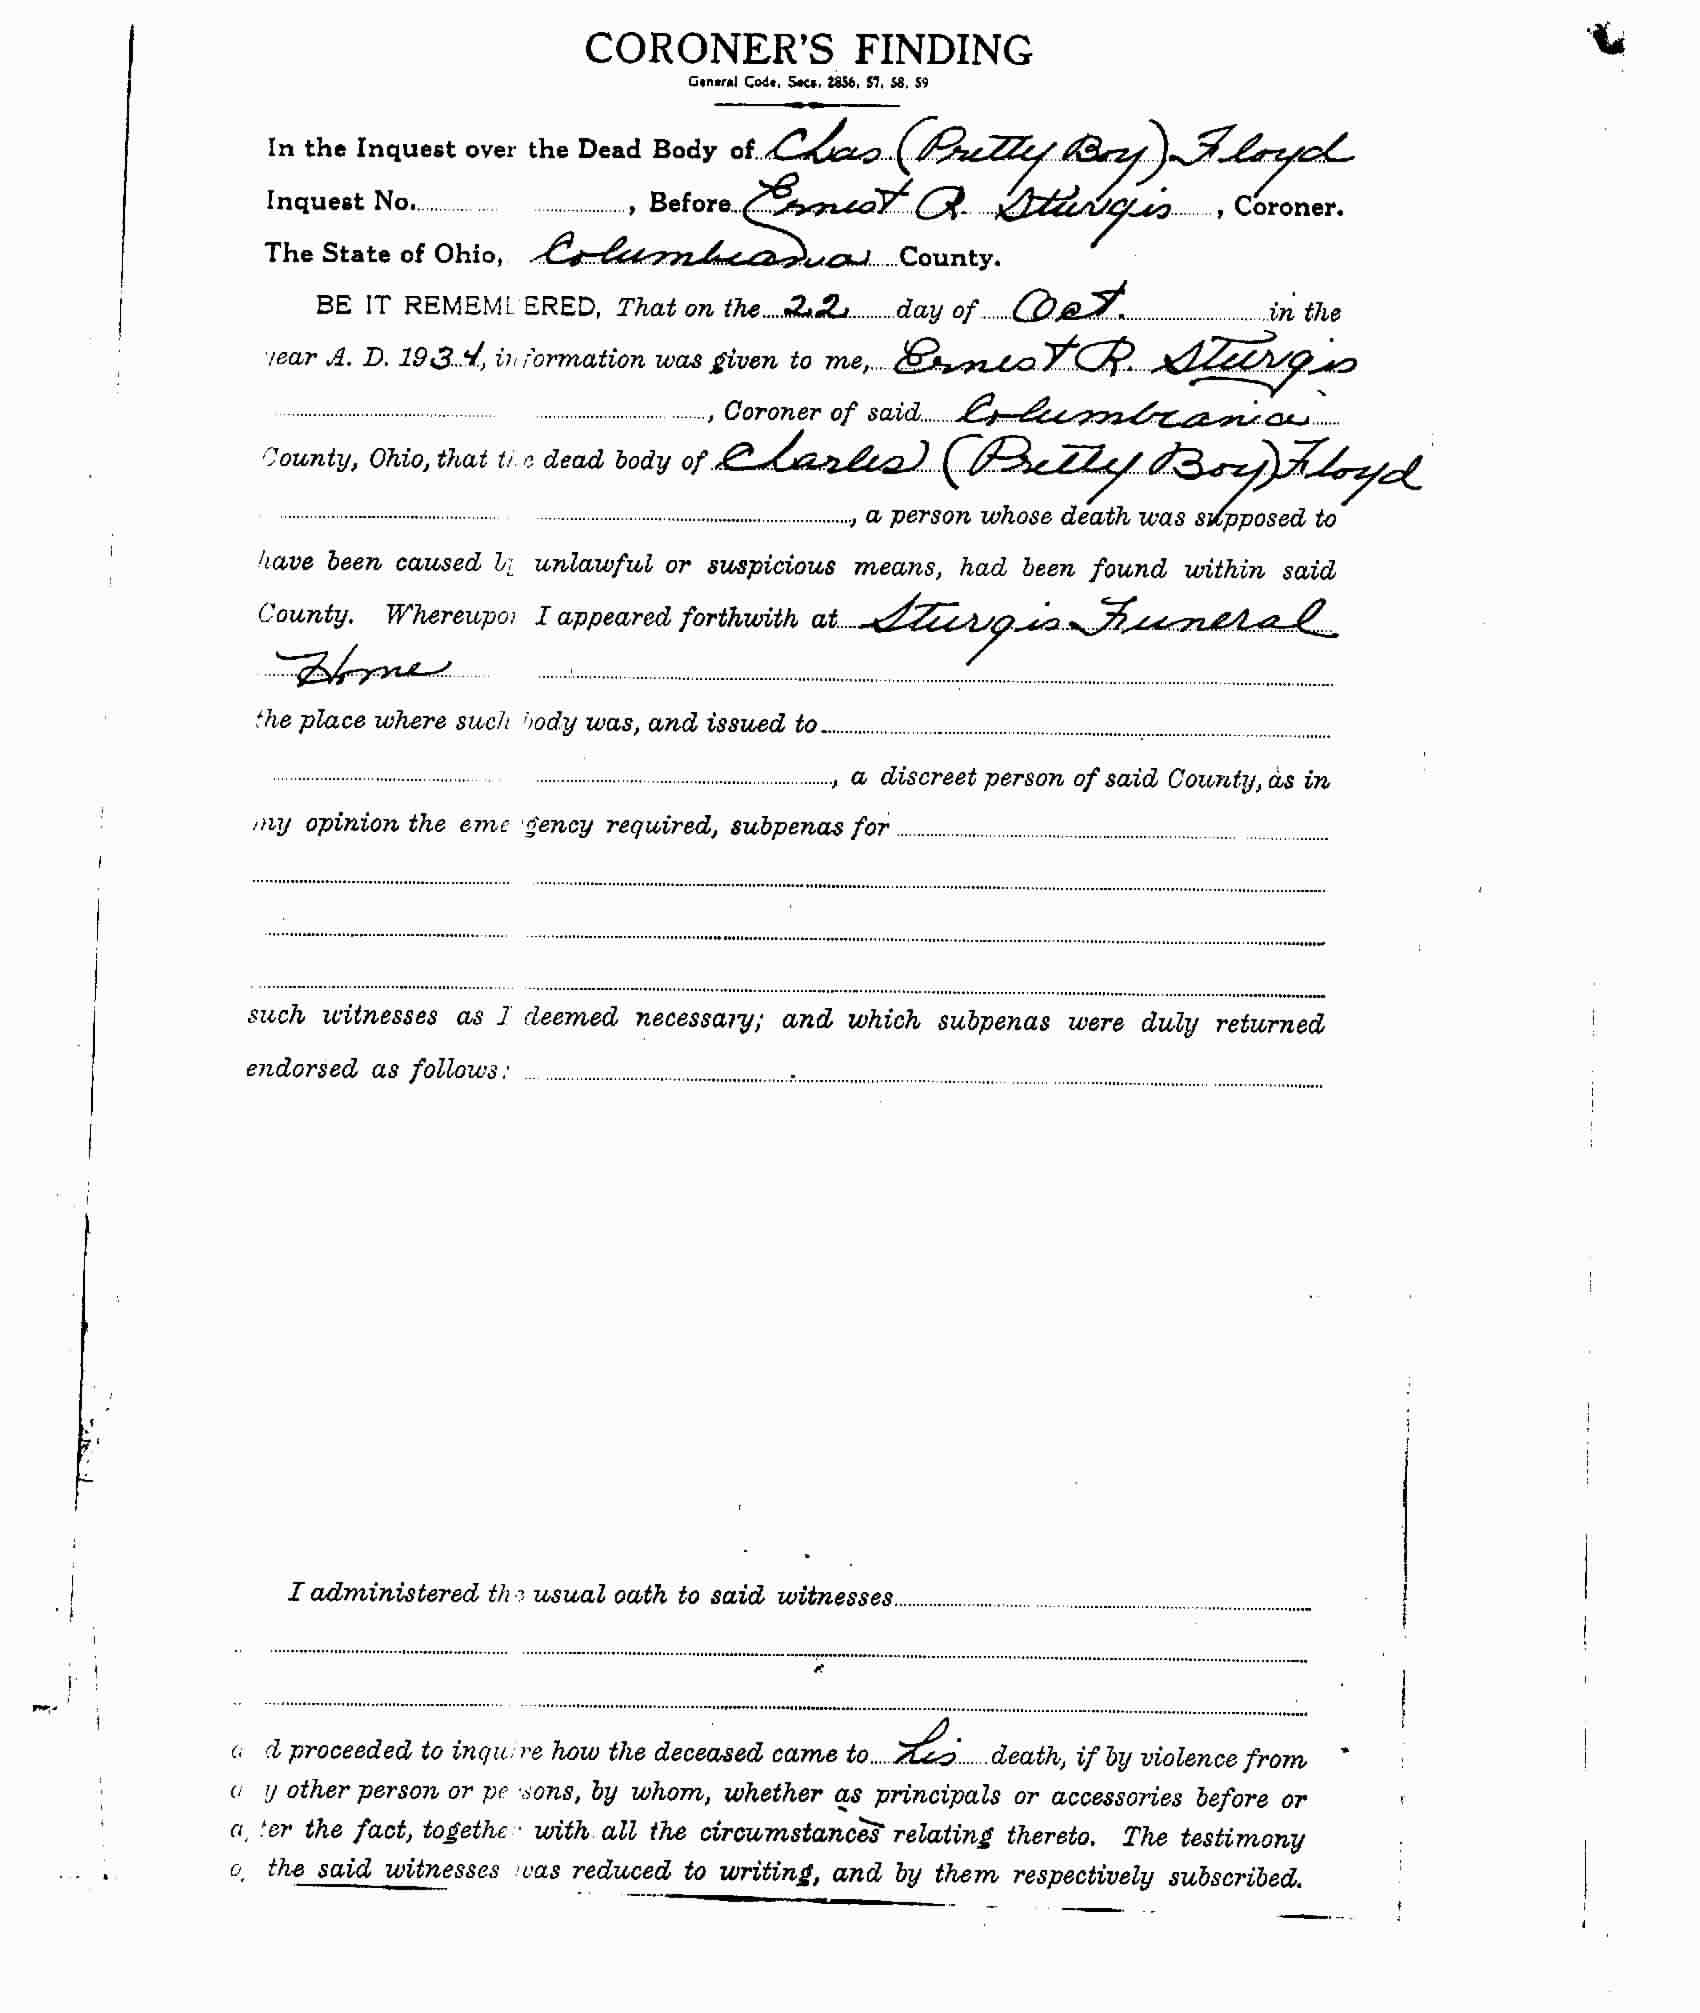 Page 2 of the Coroner's report